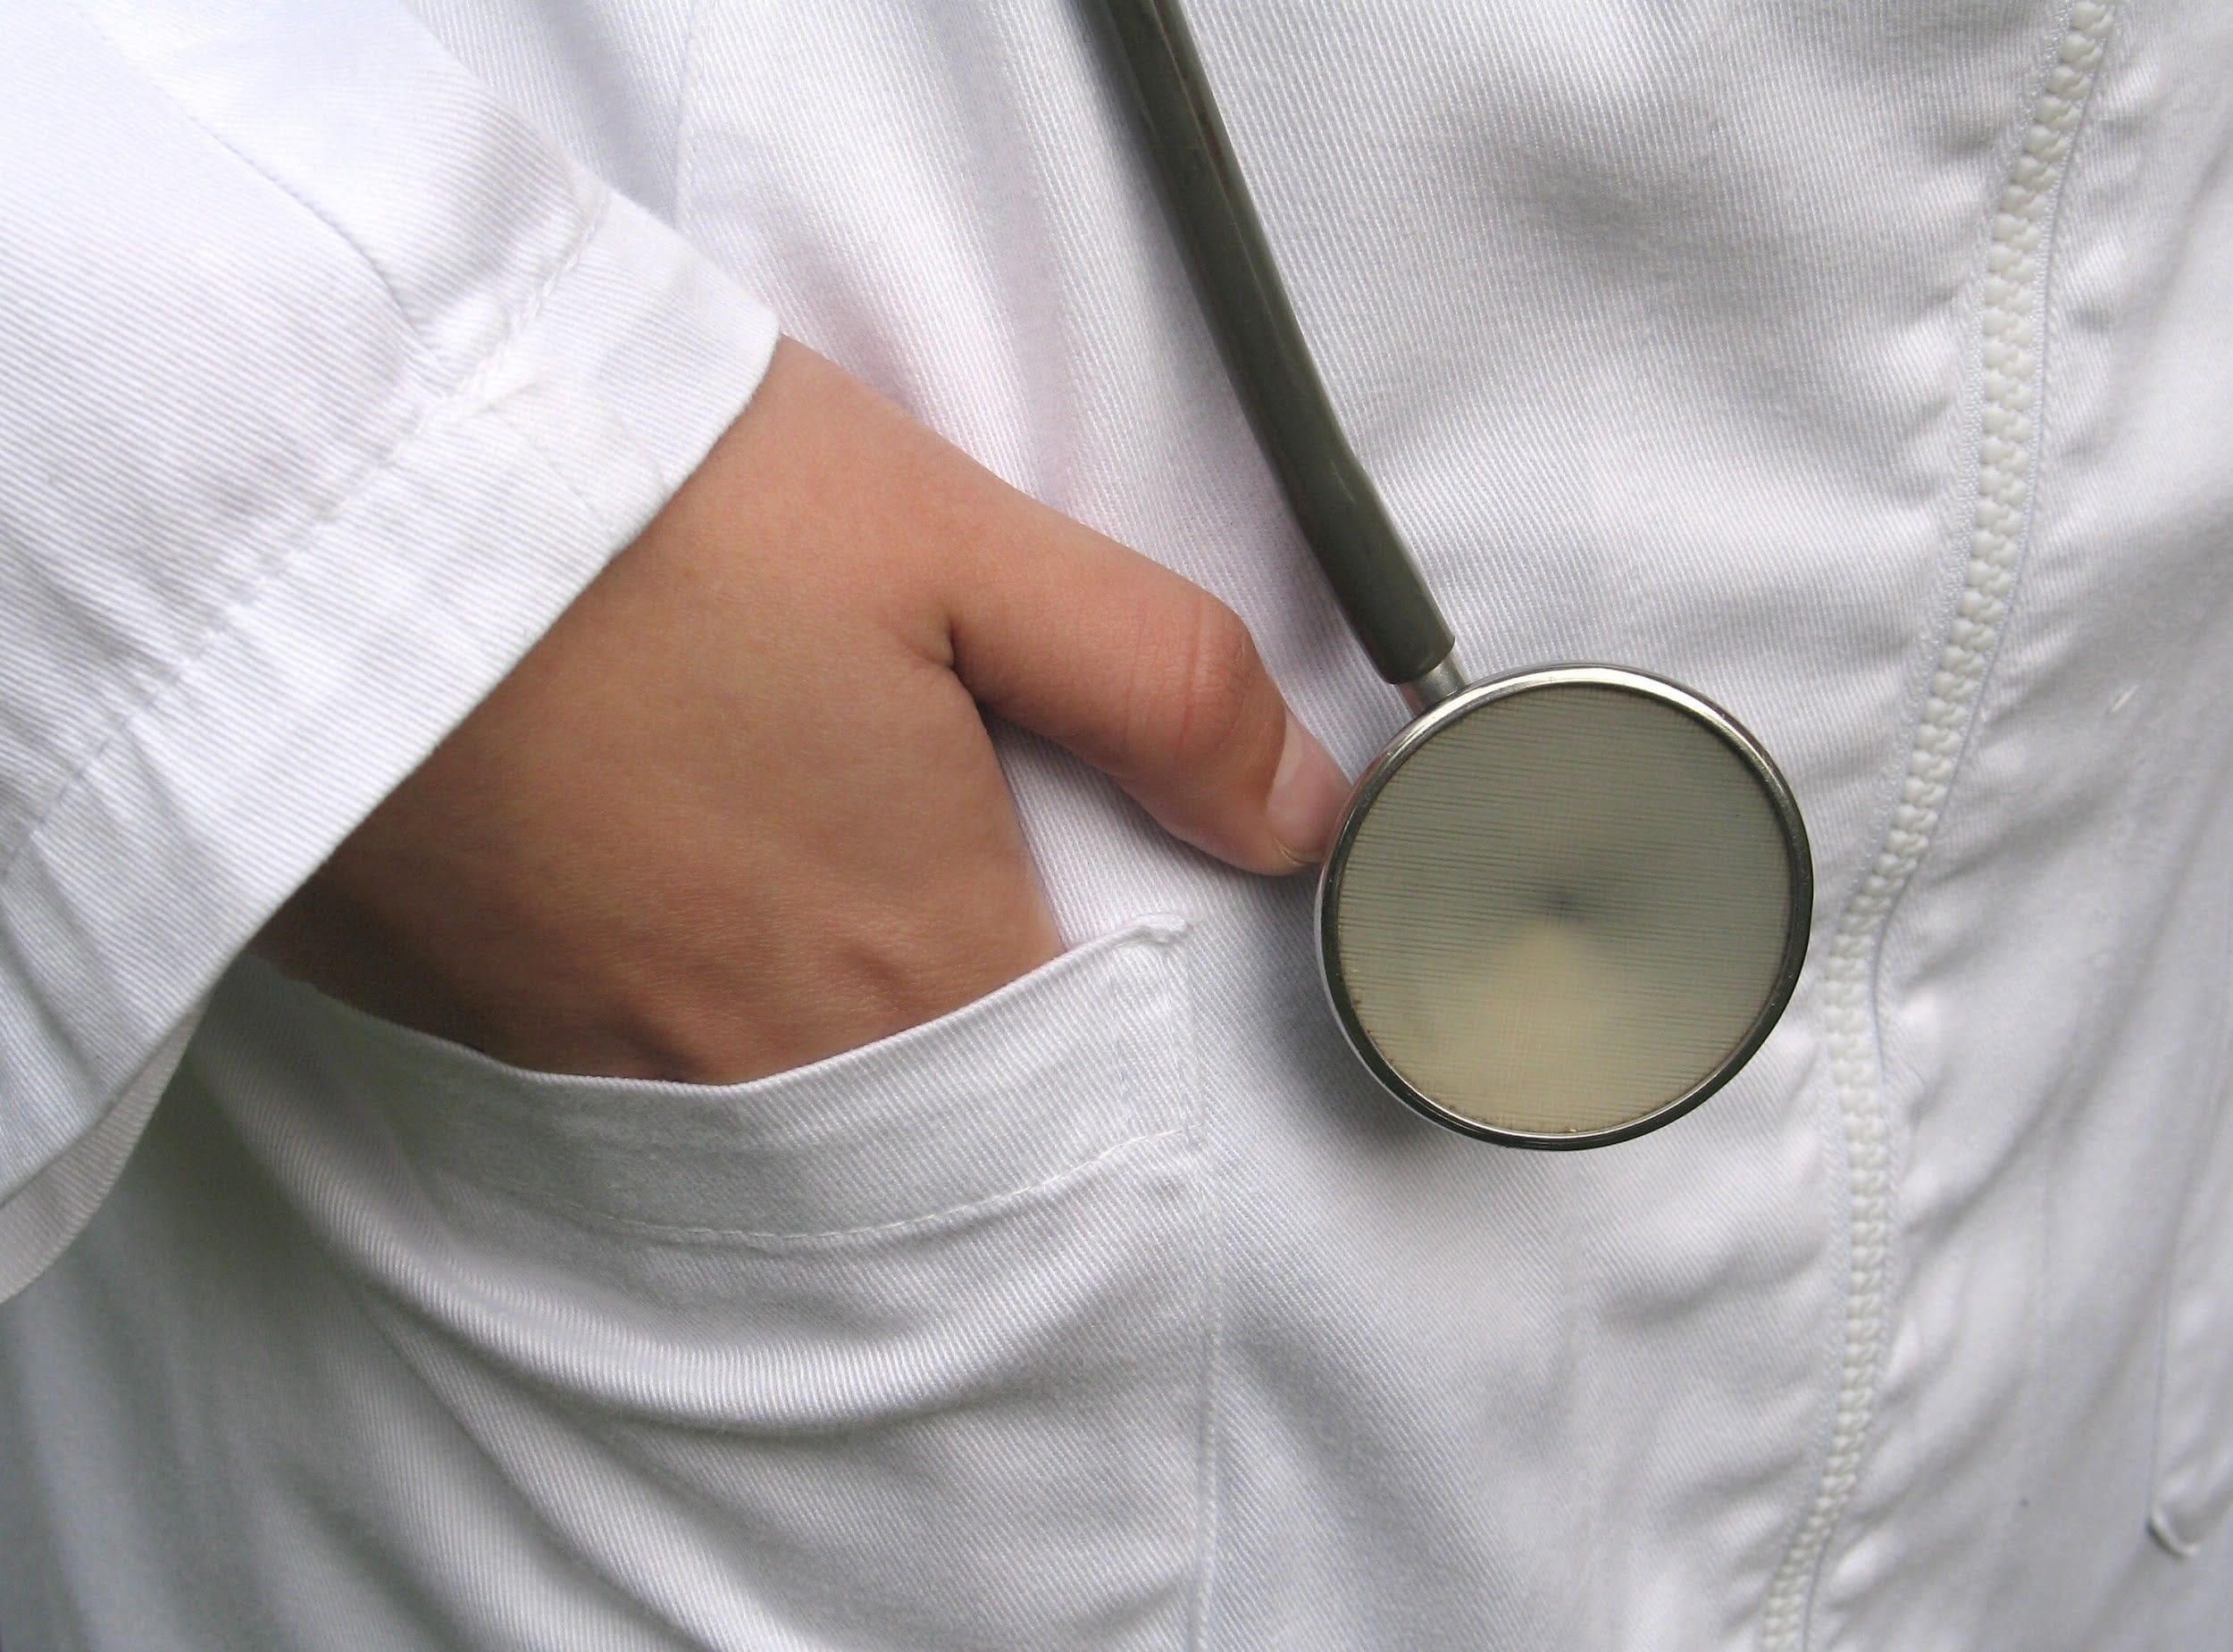 What to Consider When Choosing a Stethoscope